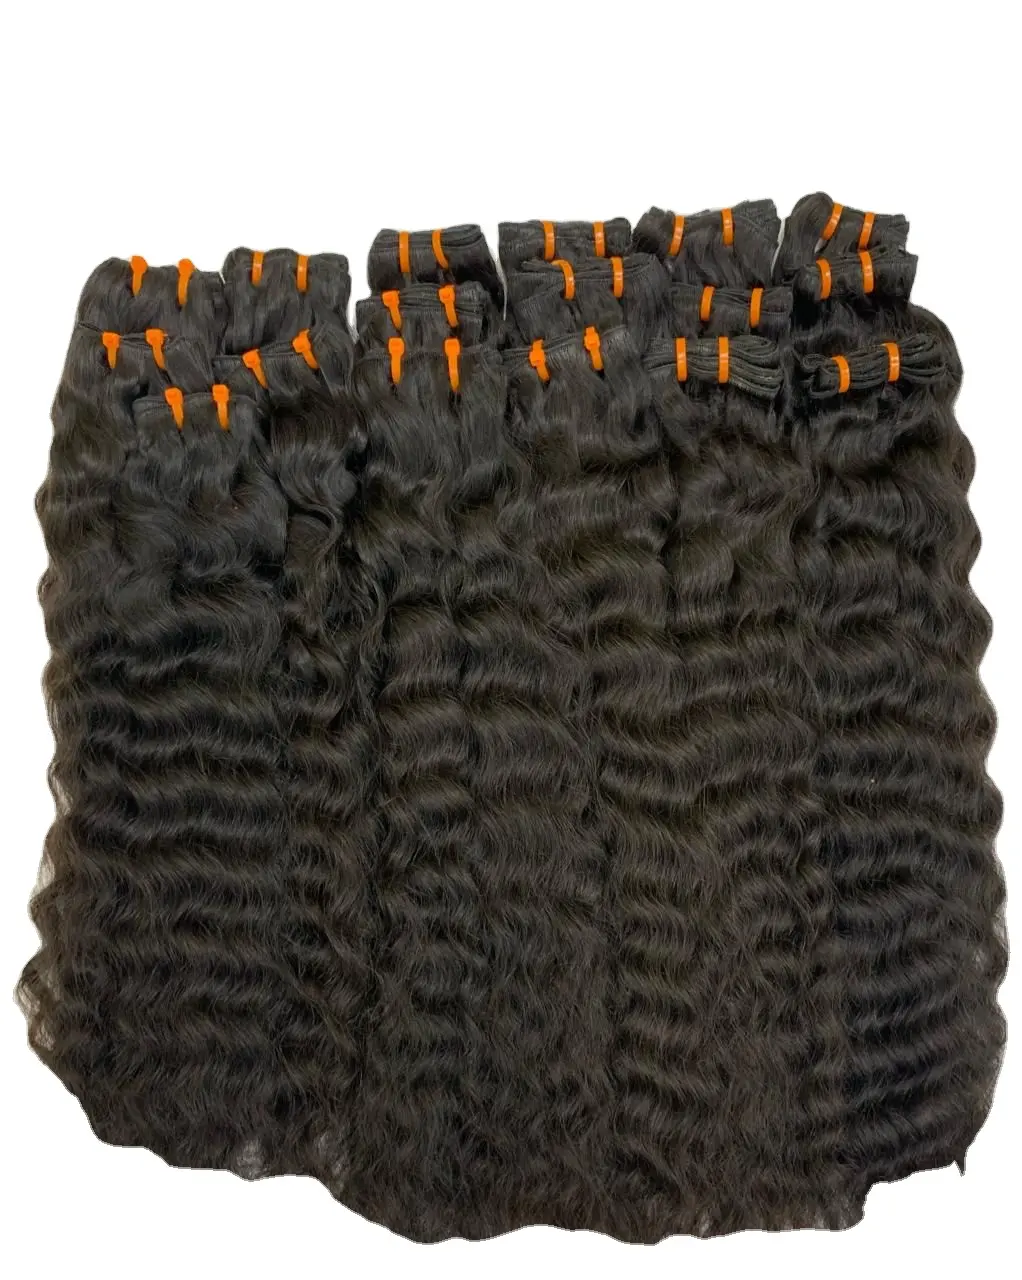 Top Raw Virgin Indian Hair Vendor Cuticle Aligned Raw Indian Temple Hair Supplier in India